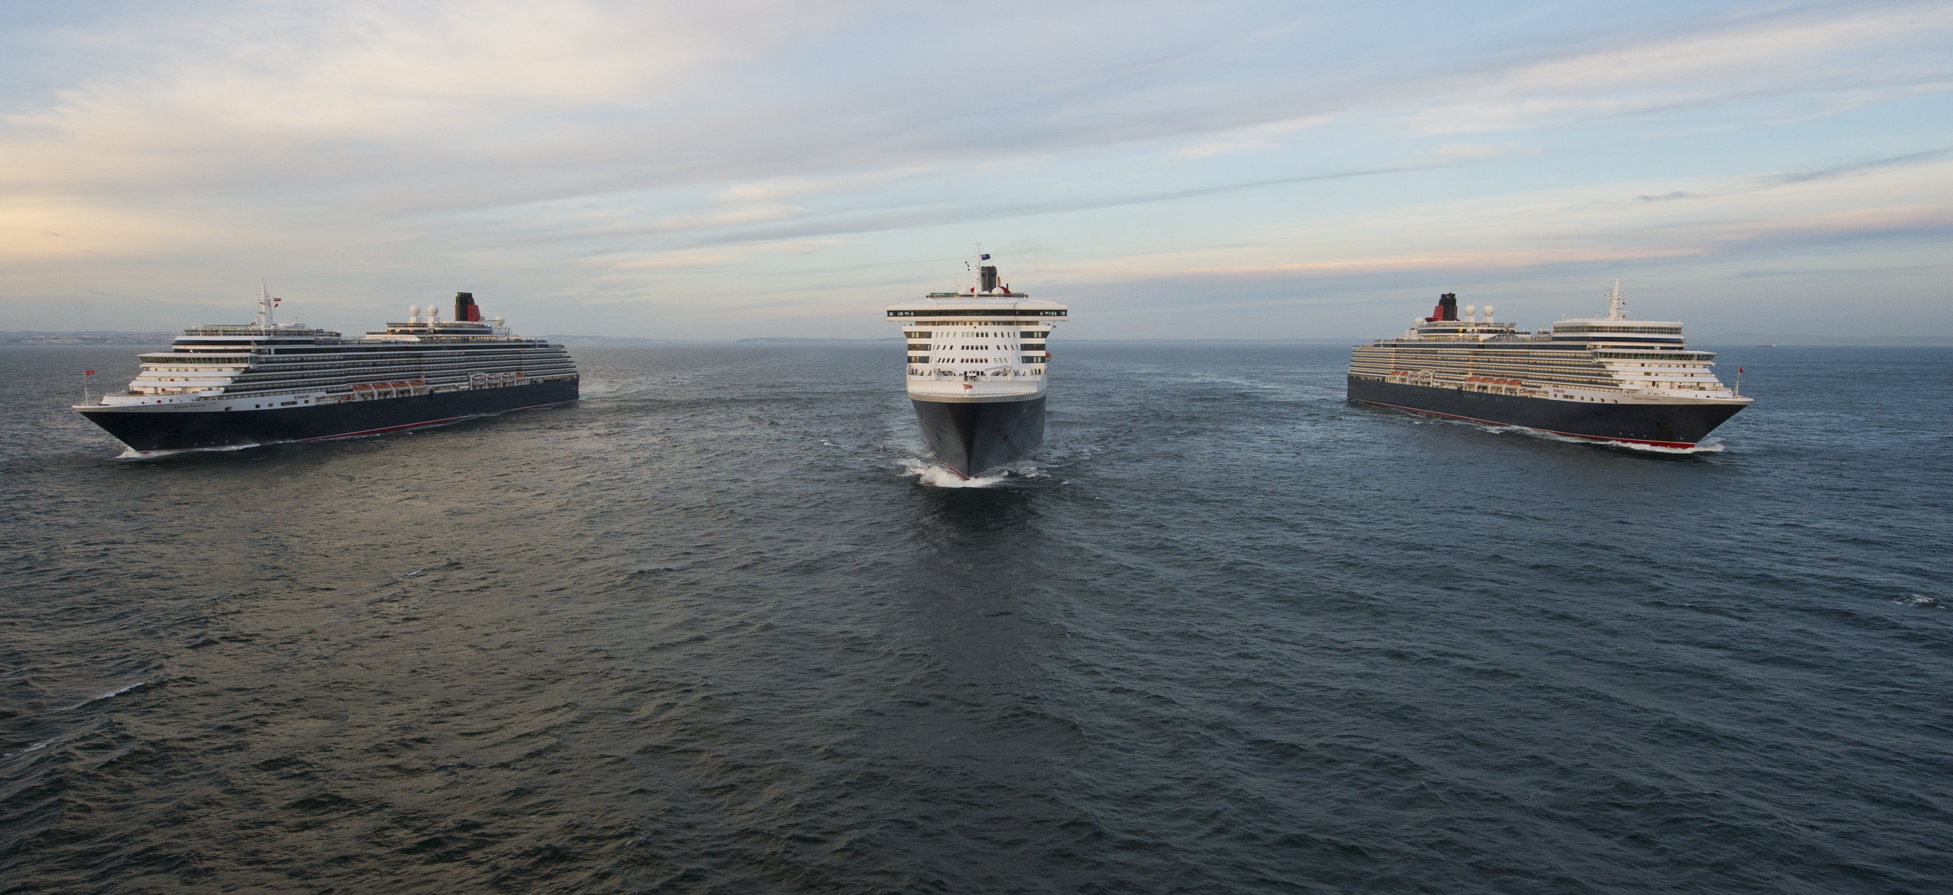 To mark Queen Mary 2s 10th anniversary the liner sails alongside Queen 2